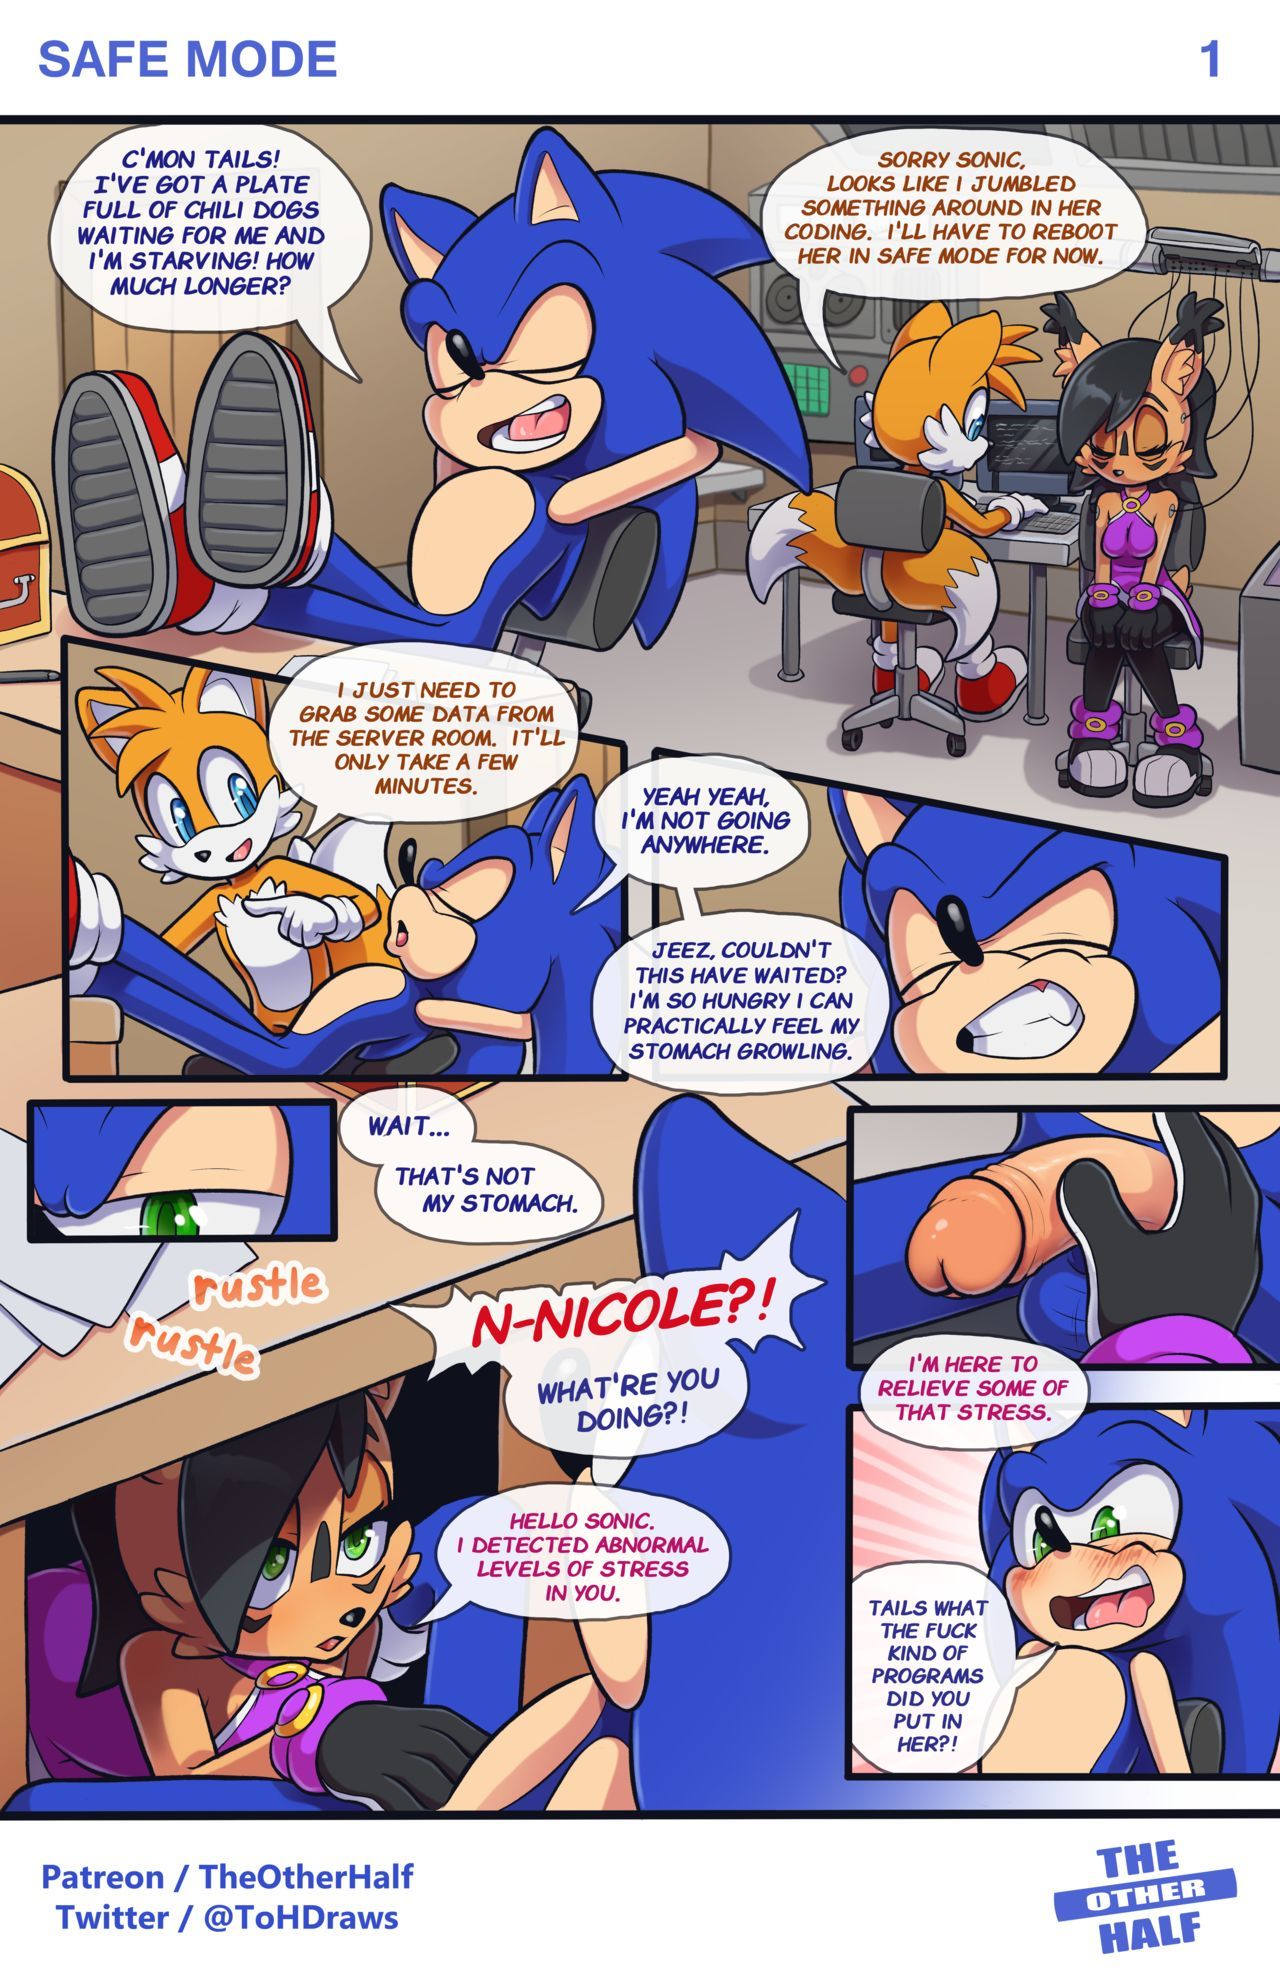 Safe Mode - TheOtherHalf [Sonic the Hedgehog] page 1